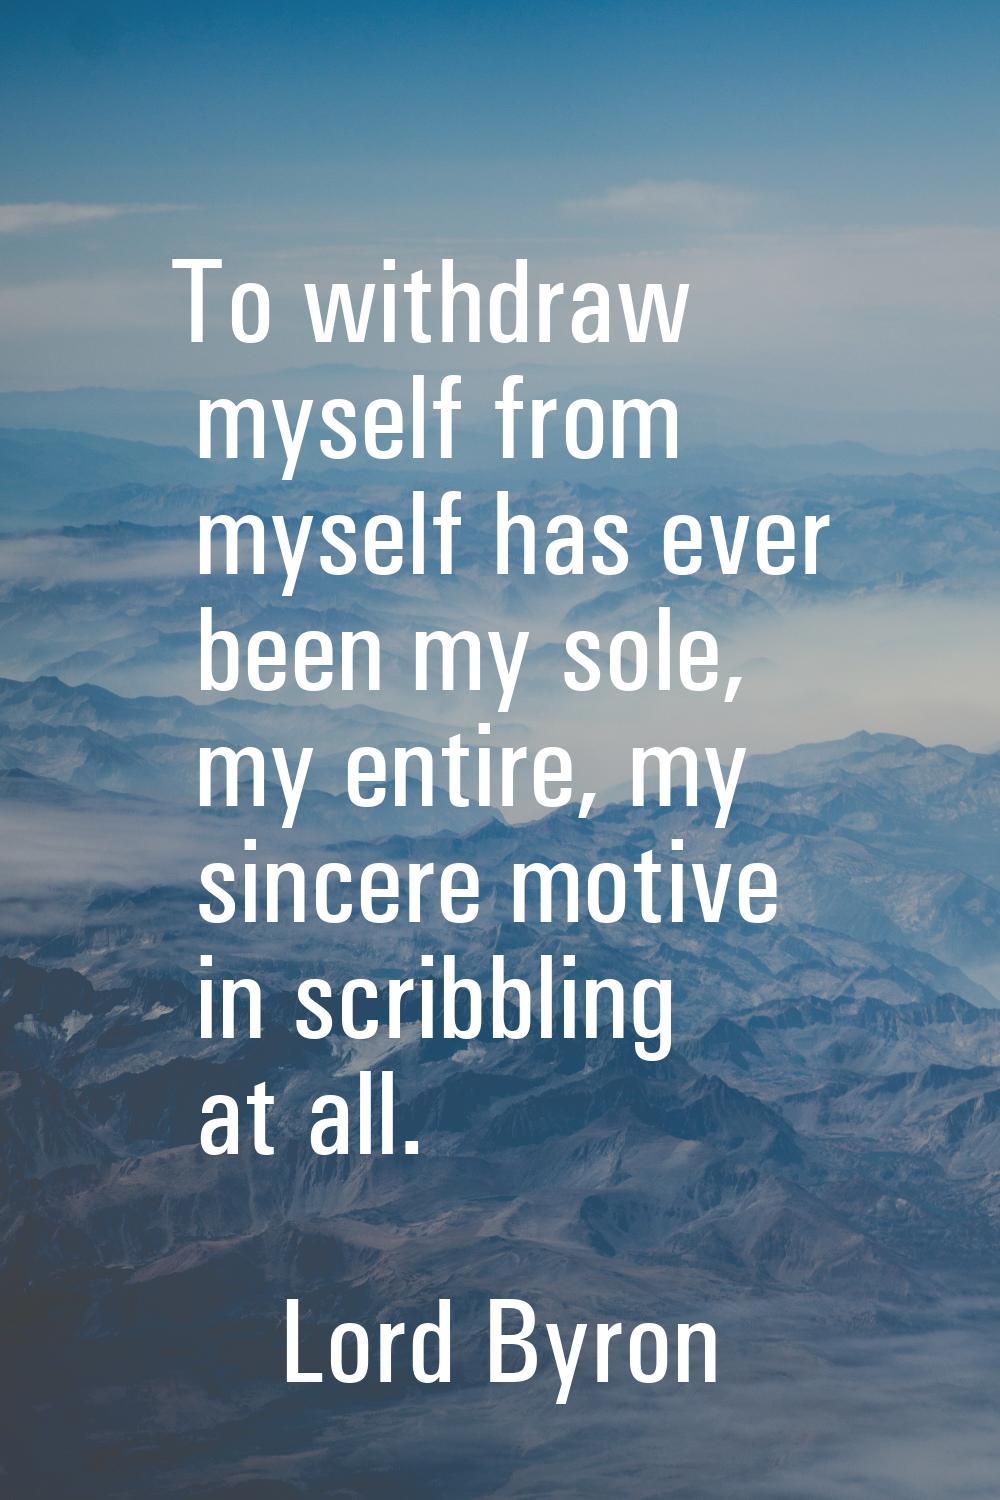 To withdraw myself from myself has ever been my sole, my entire, my sincere motive in scribbling at